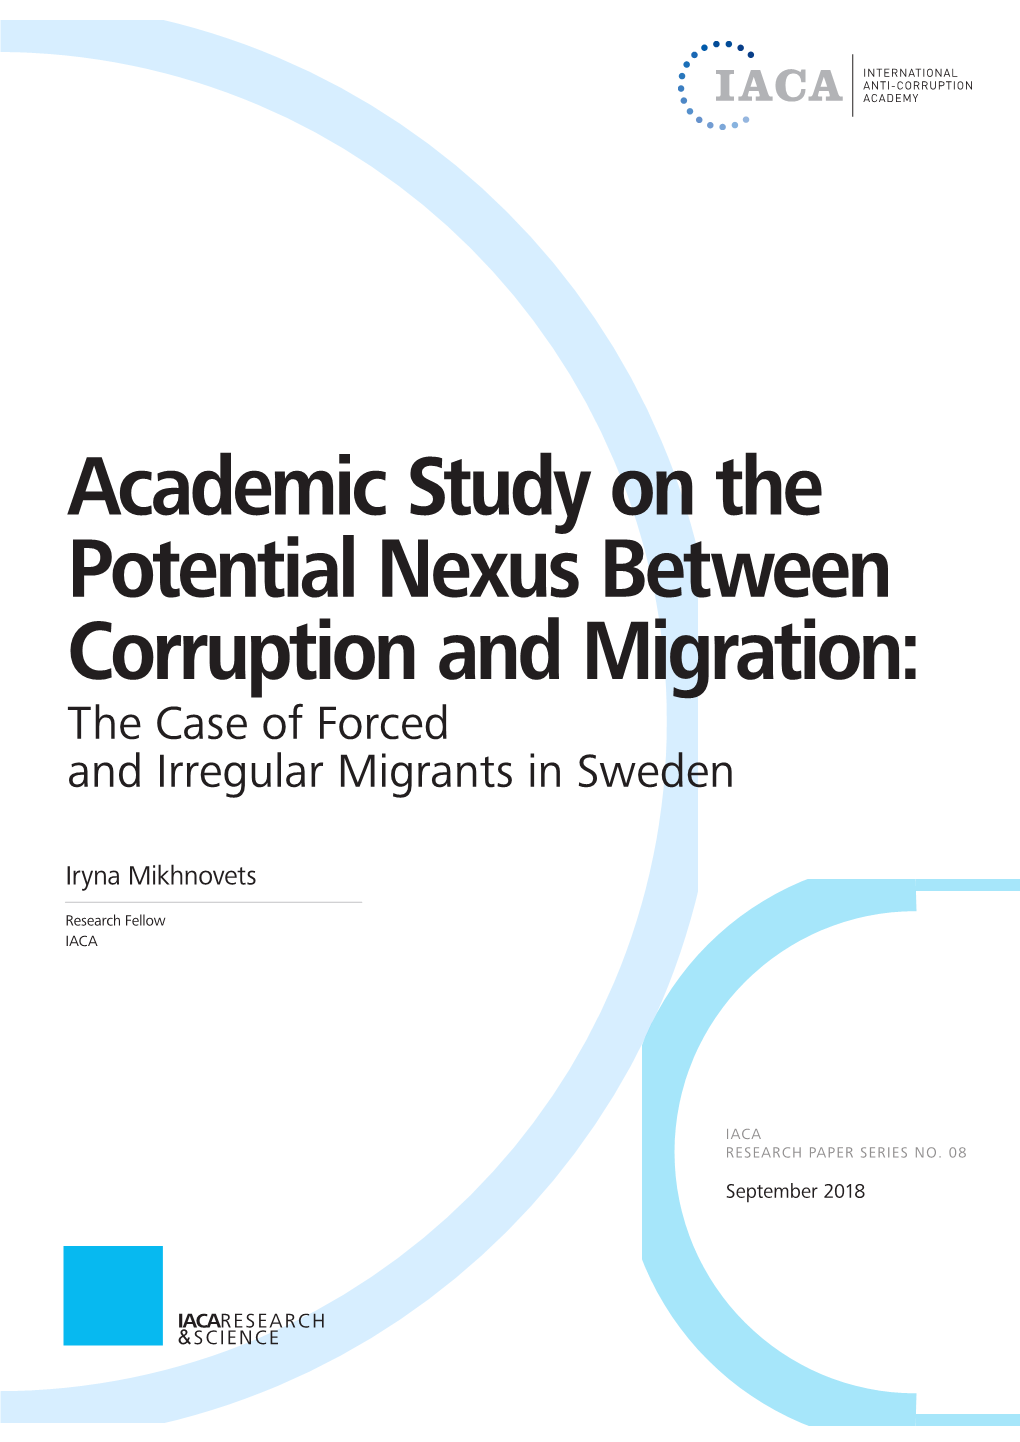 Academic Study on the Potential Nexus Between Corruption and Migration: the Case of Forced and Irregular Migrants in Sweden